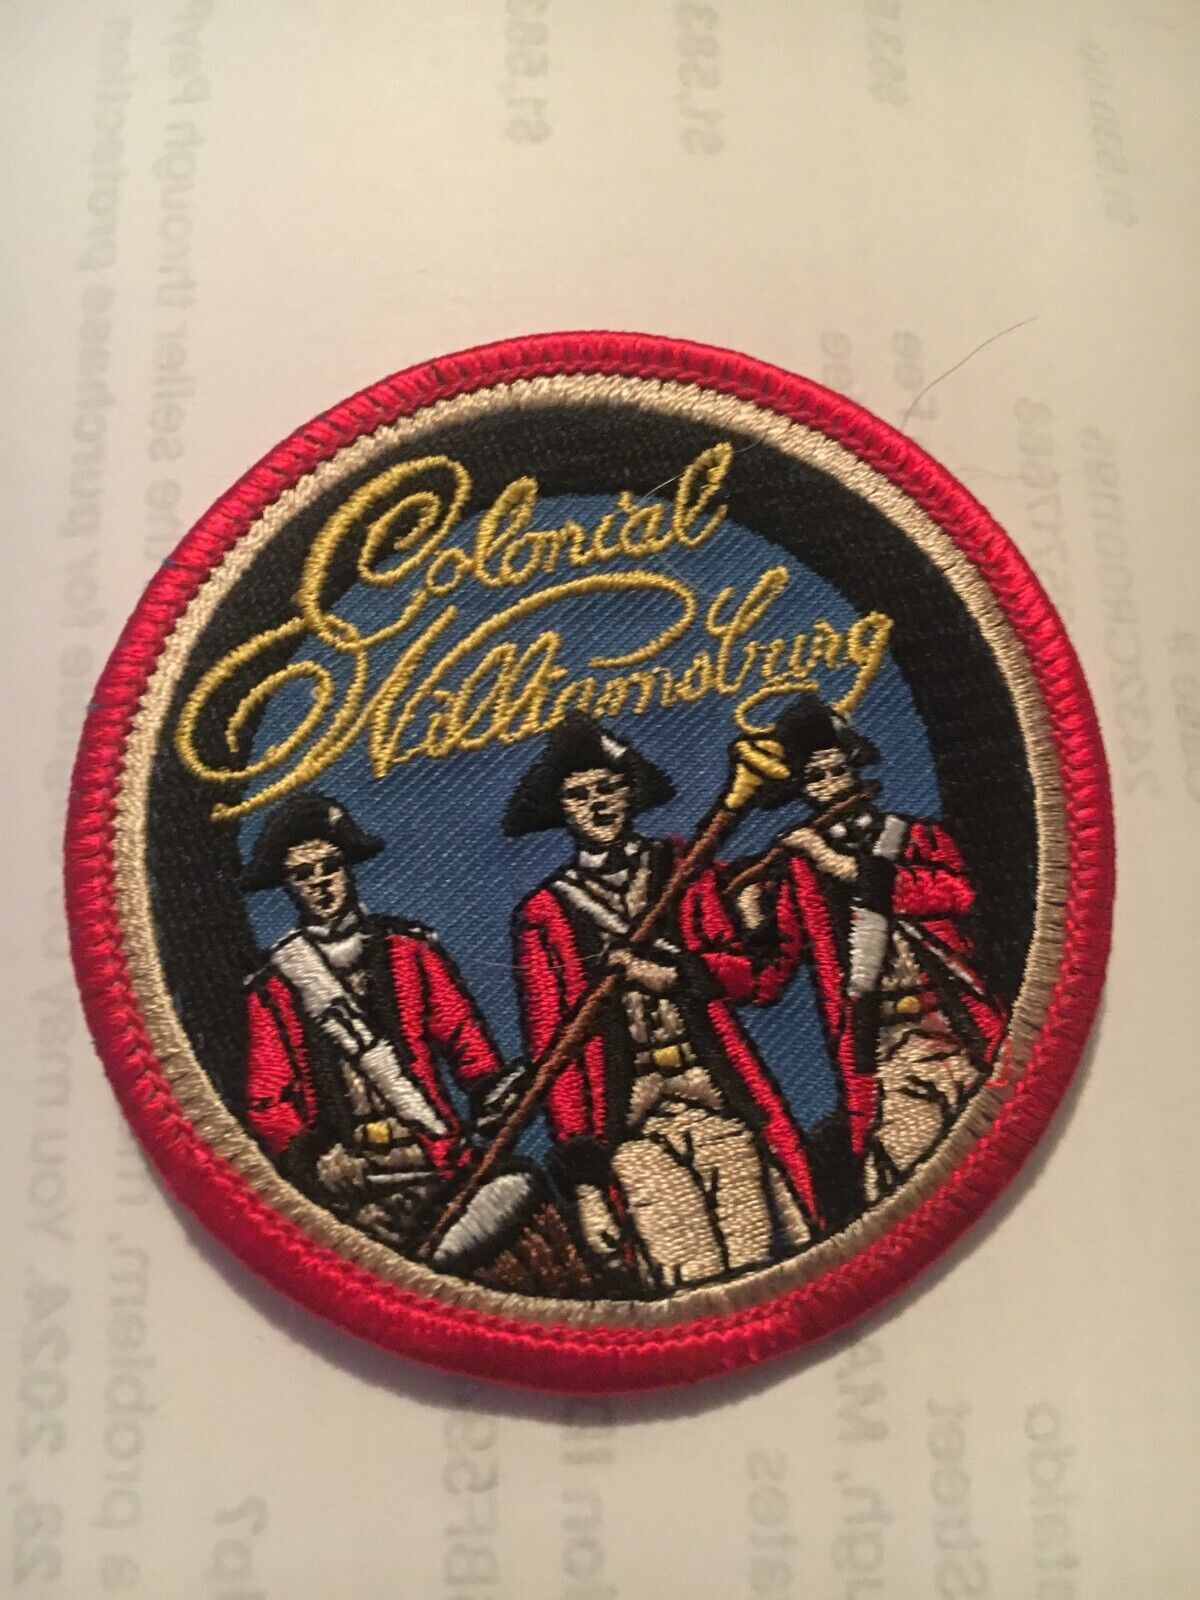 Colonial Williamsburg Travel patch 